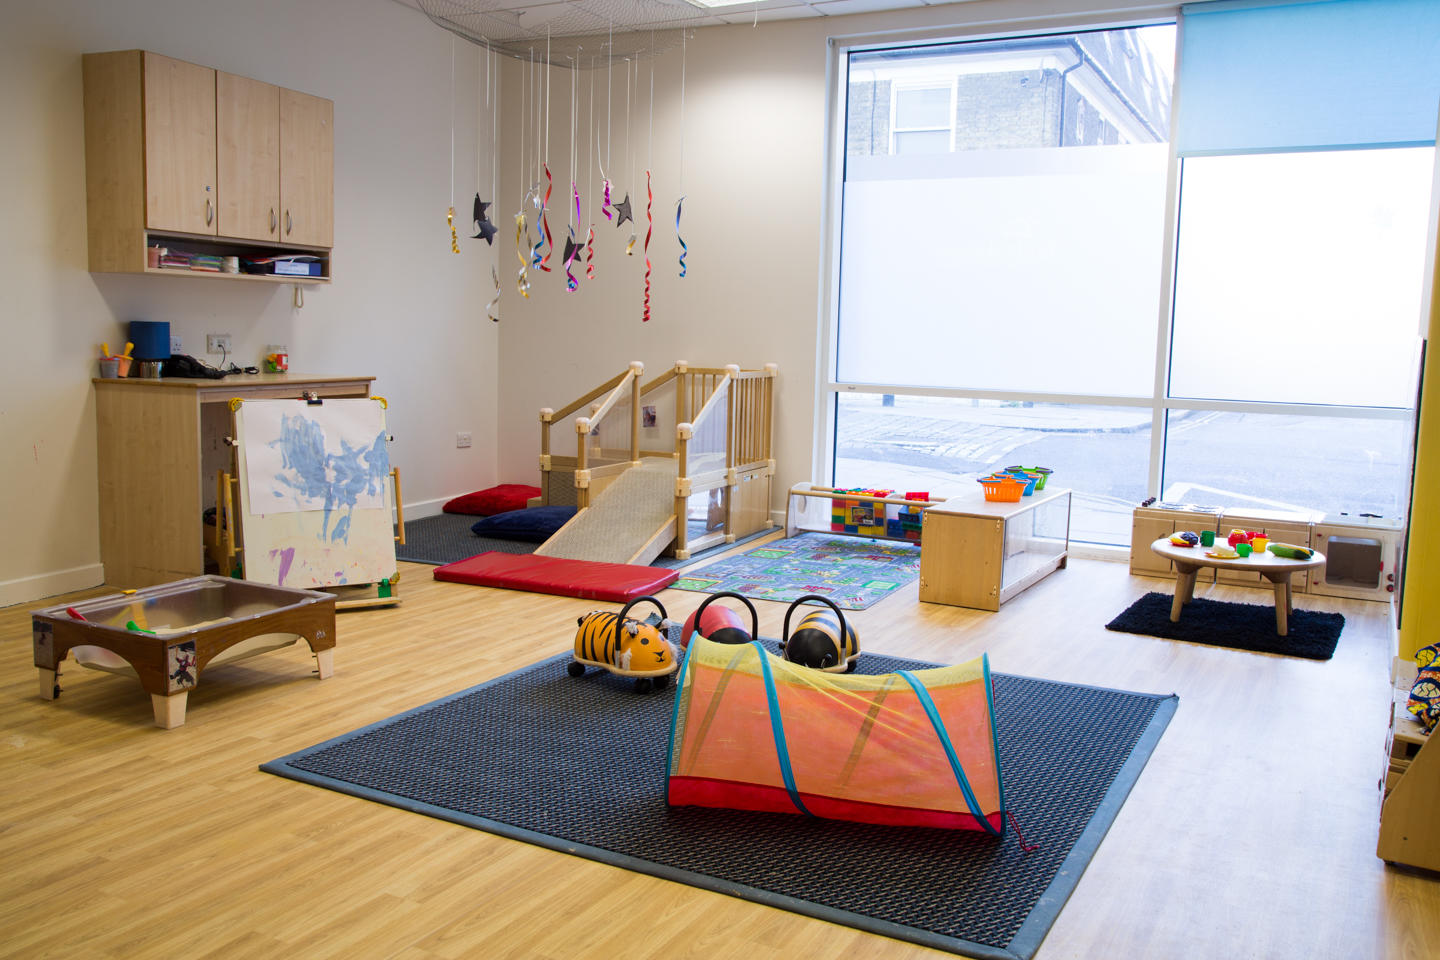 Images Bright Horizons Tabard Square Nursery and Preschool